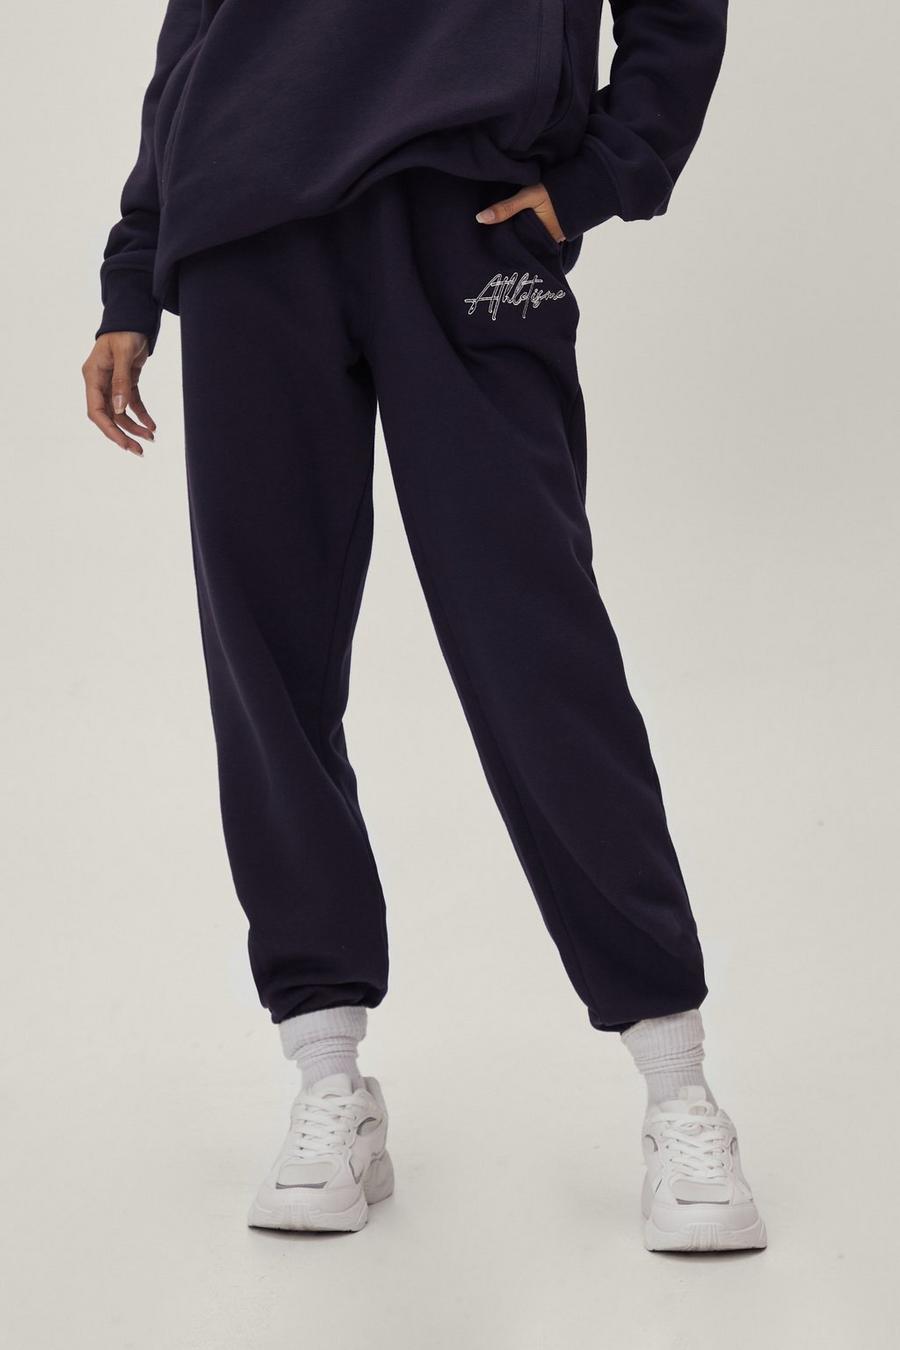 Embroidered Athleisure Relaxed Fit Joggers